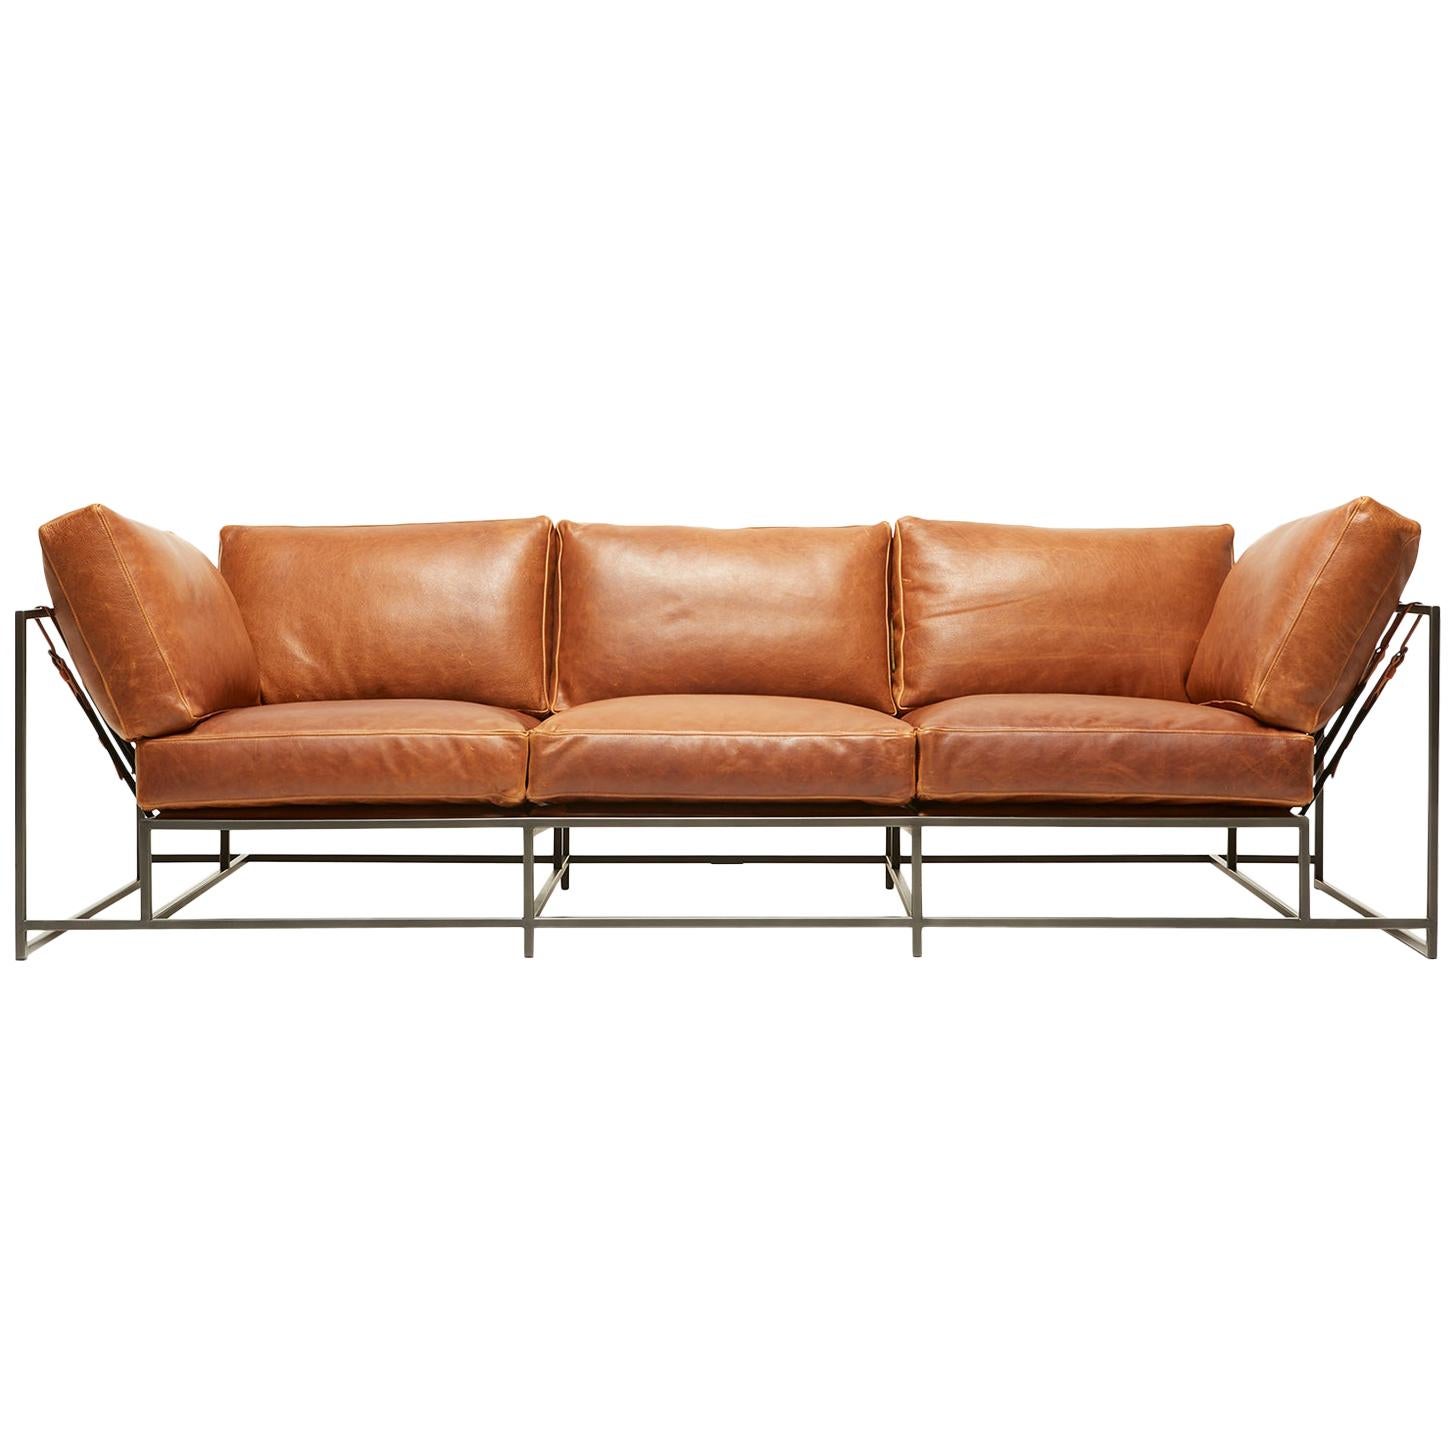 Potomac Tan Leather and Blackened Steel Sofa For Sale